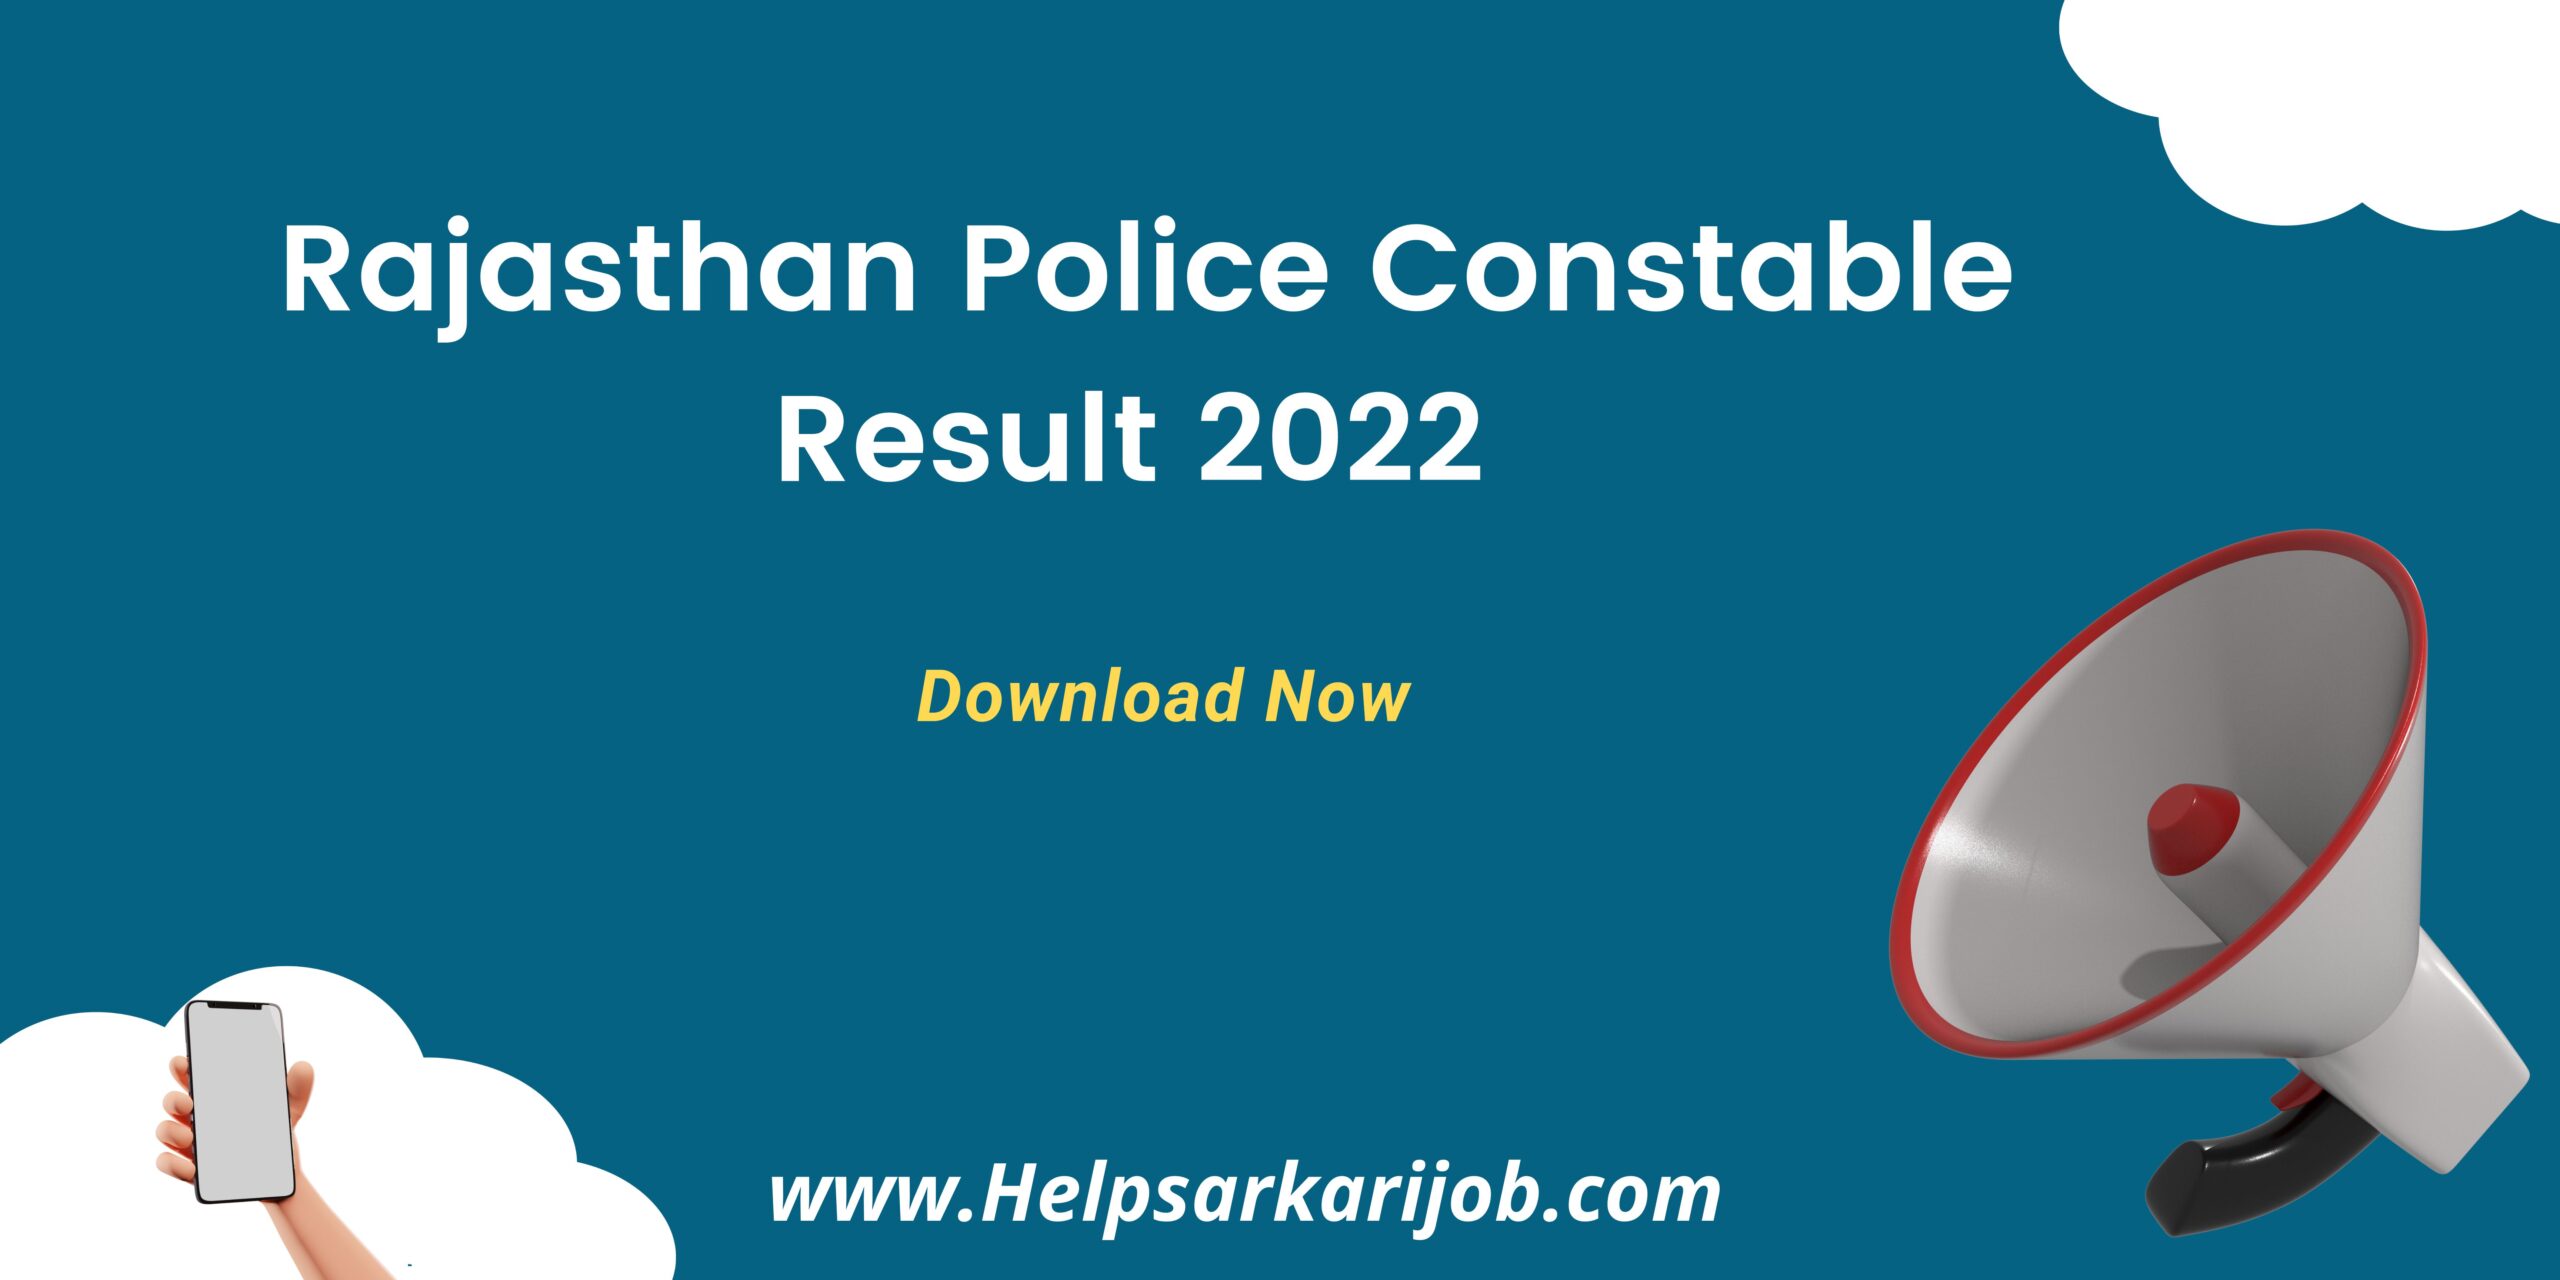 Rajasthan Police Constable Result 2022 3 scaled -